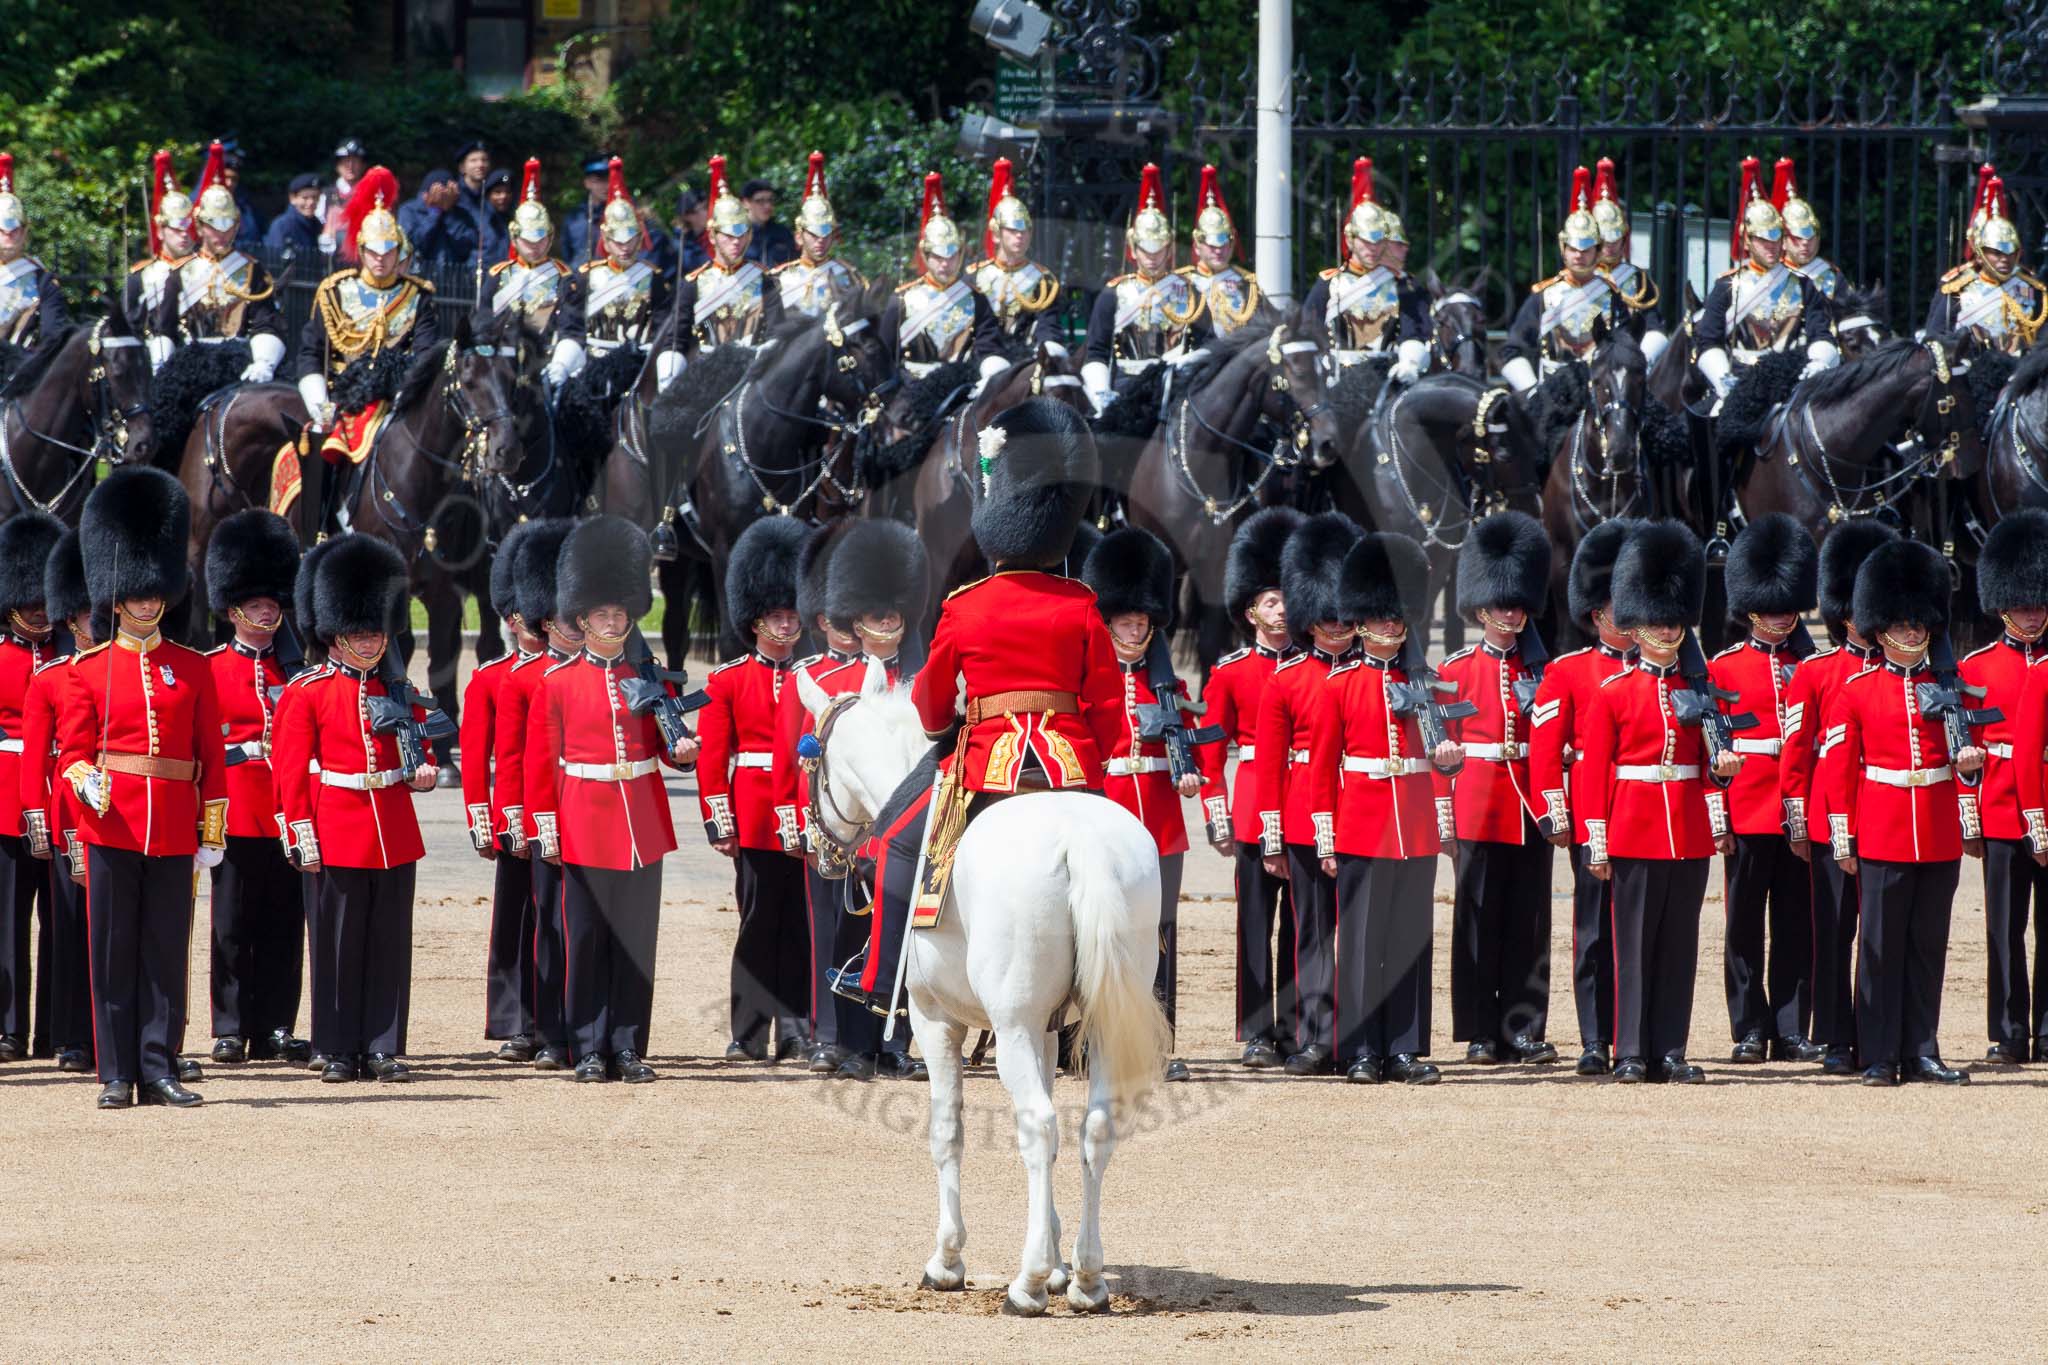 The Colonel's Review 2013: The Field Officer in Brigade Waiting, Lieutenant Colonel Dino Bossi, Welsh Guards, giving orders after the Ride Past..
Horse Guards Parade, Westminster,
London SW1,

United Kingdom,
on 08 June 2013 at 12:02, image #808